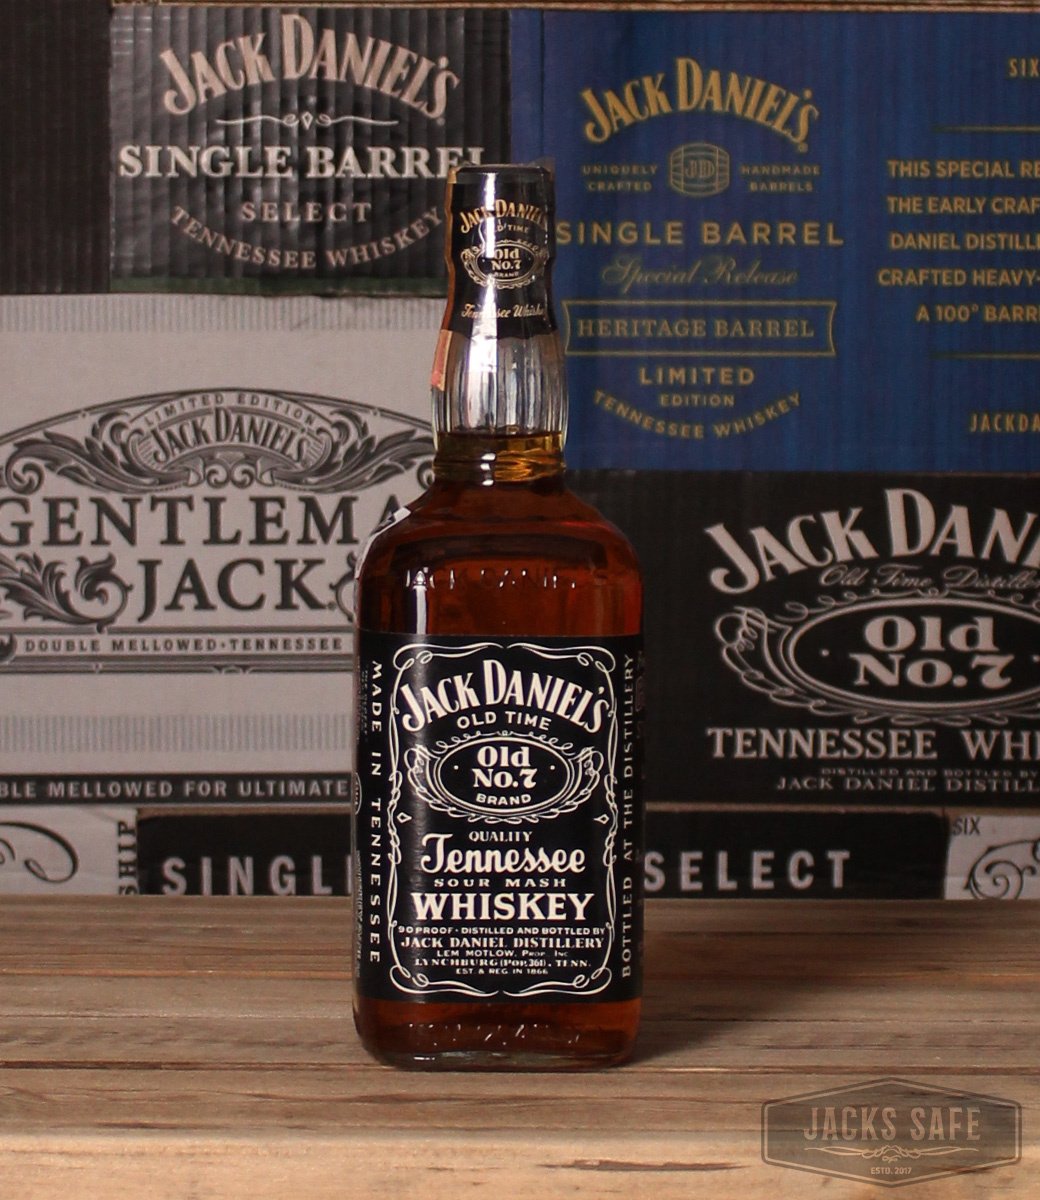 JACK DANIEL'S - Black Label - Paper seal - 750ml - INT - USA - TRANSITION - SEVERAL YEARS